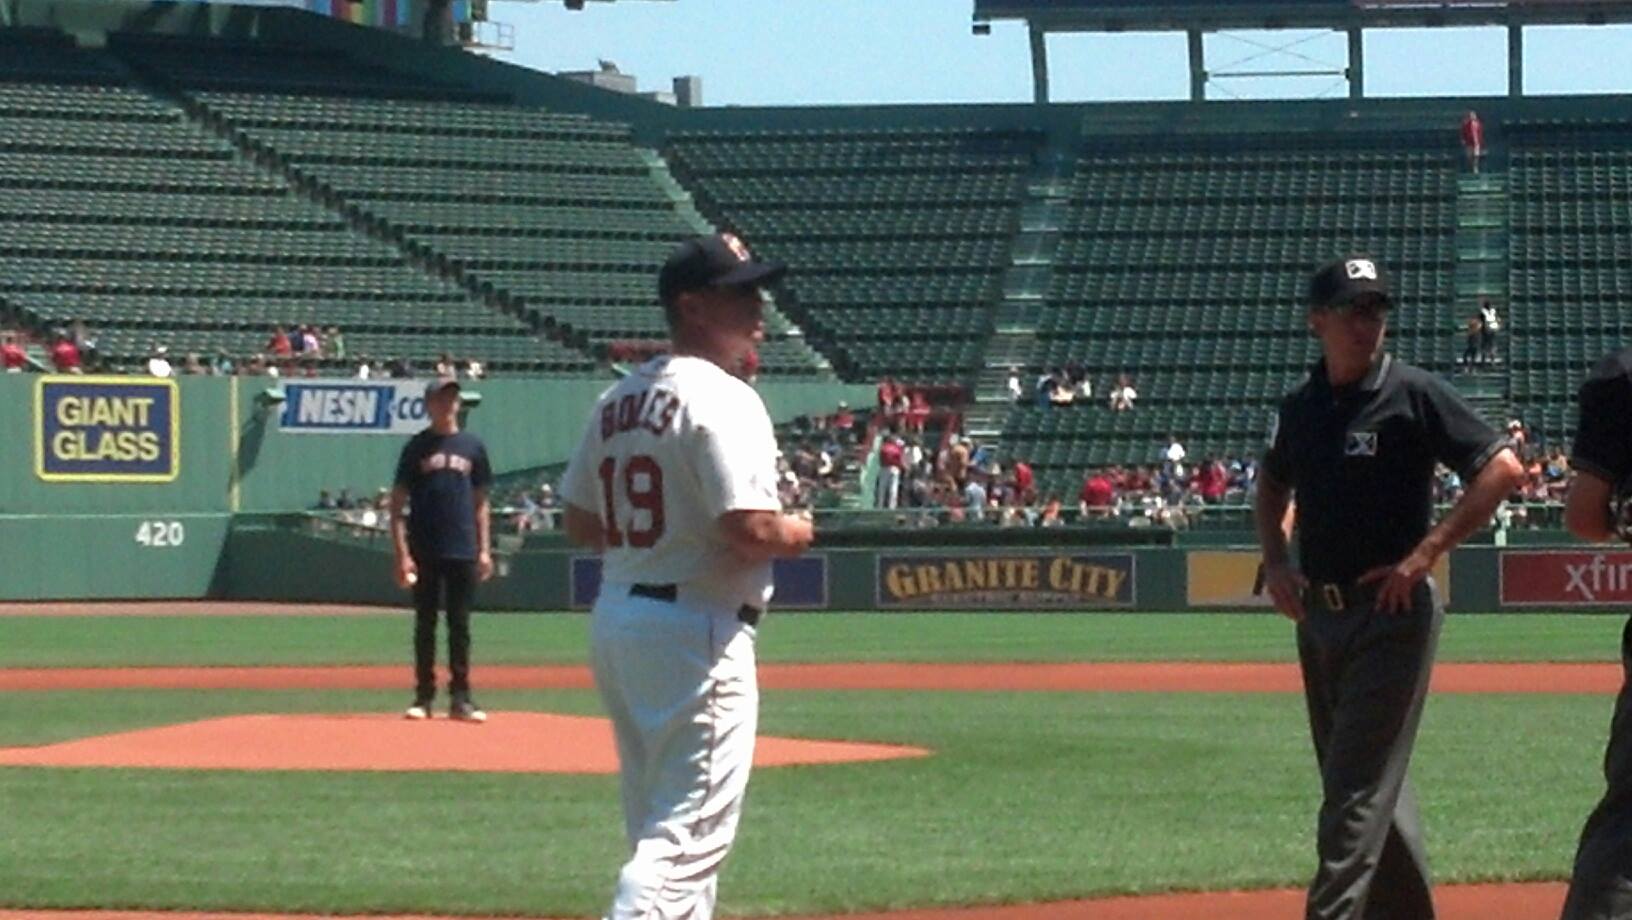 About to throw out the first pitch in the Green Monster - Fenway Park!